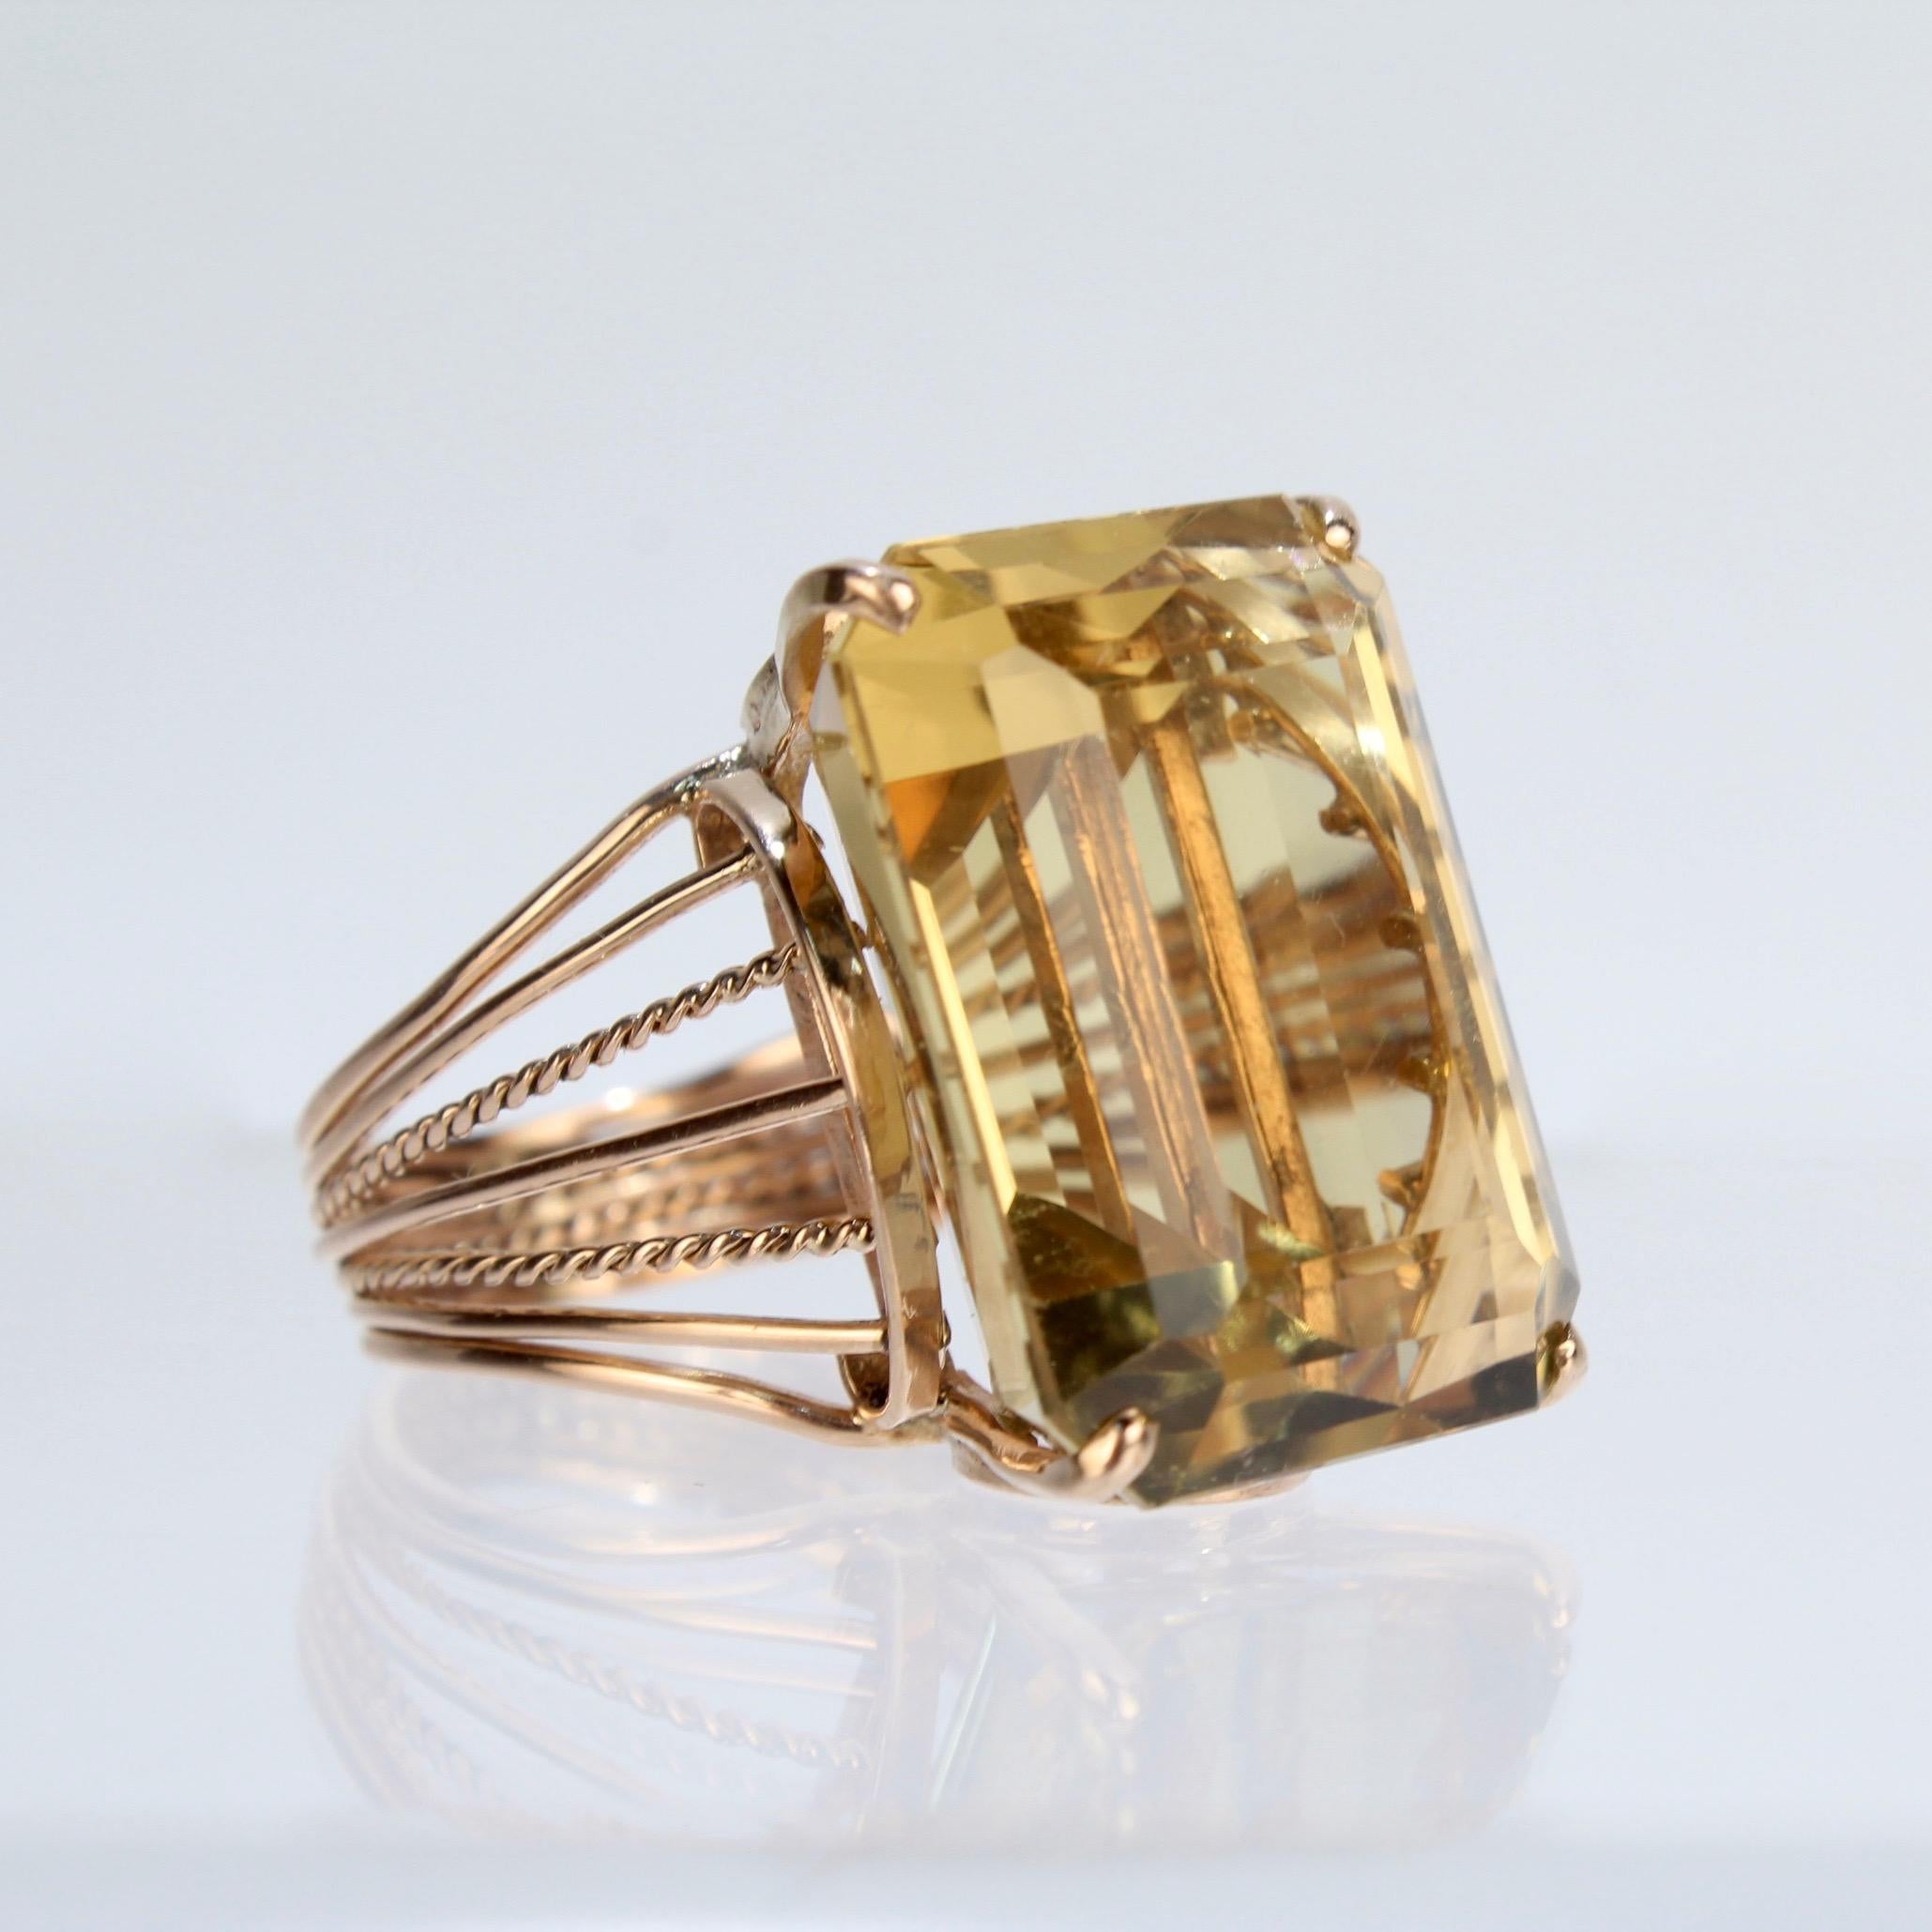 A great, large sized Citrine cocktail ring.

With a large emerald cut Citrine gemstone set in a 14k gold wire work setting. 

Simply a great statement ring and the perfect conversation starter!

Unmarked for fineness. Professionally tests at